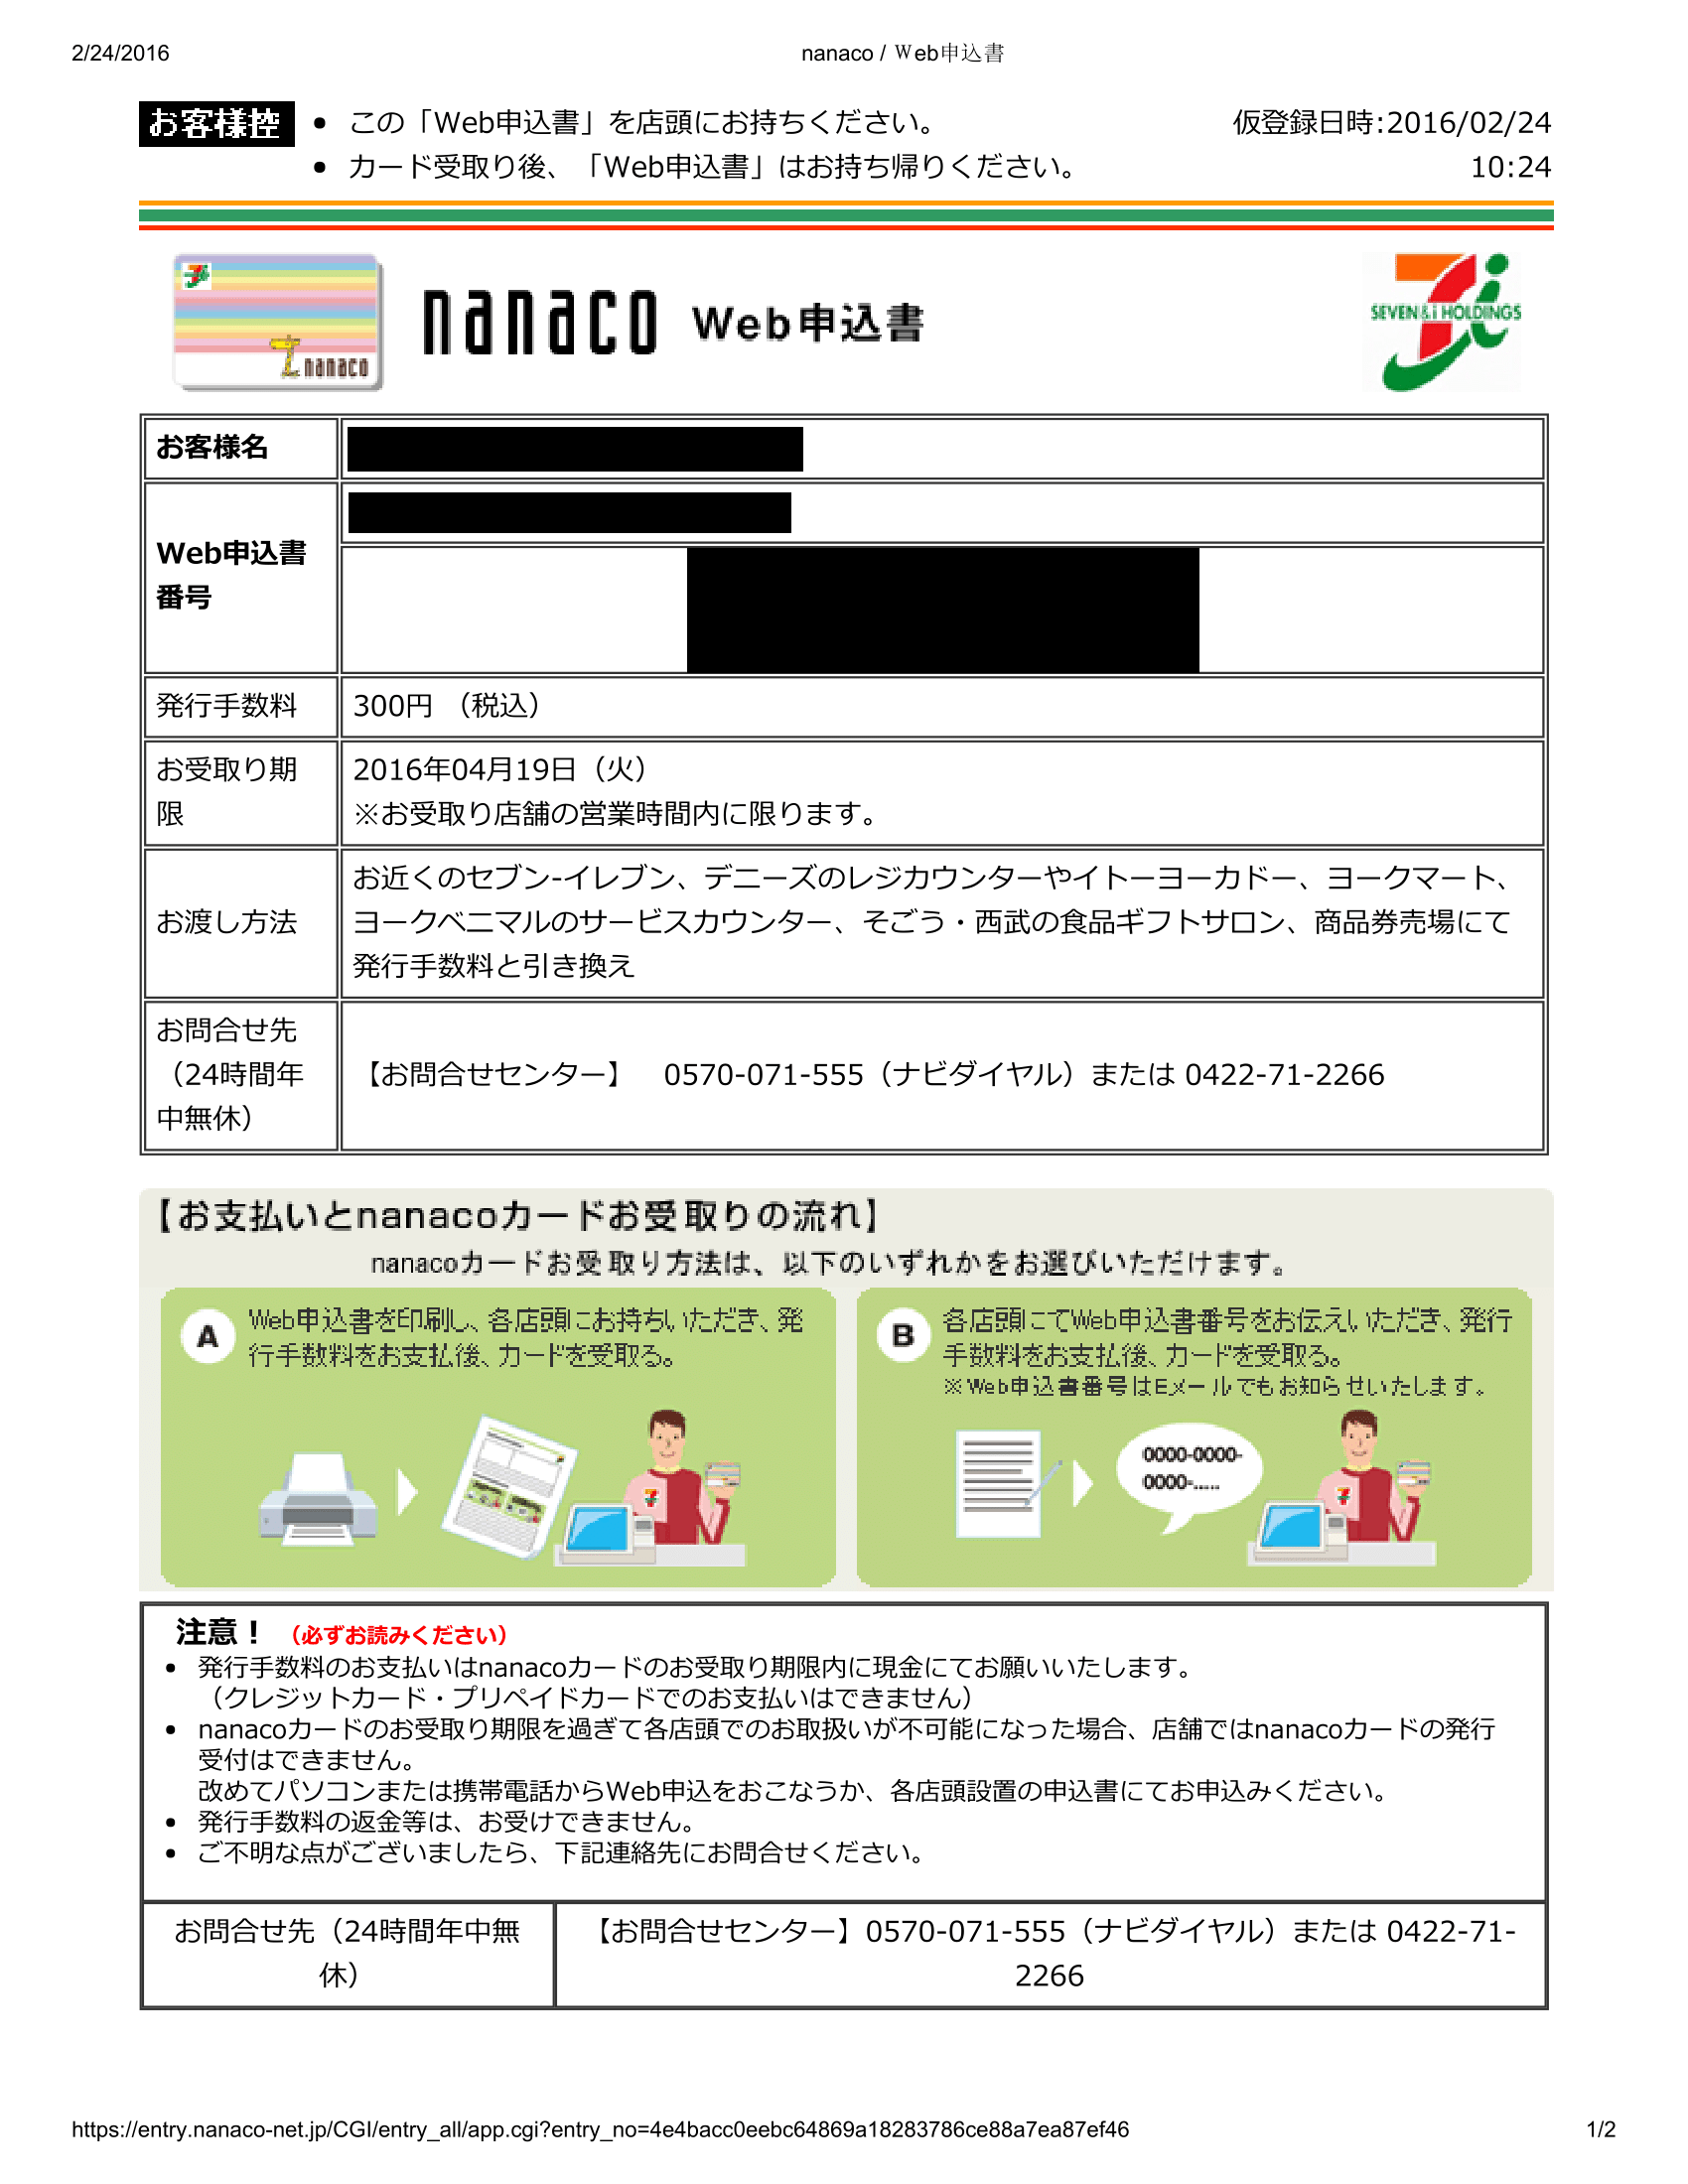 Flowerinthenight | How to apply for a Nanaco point card